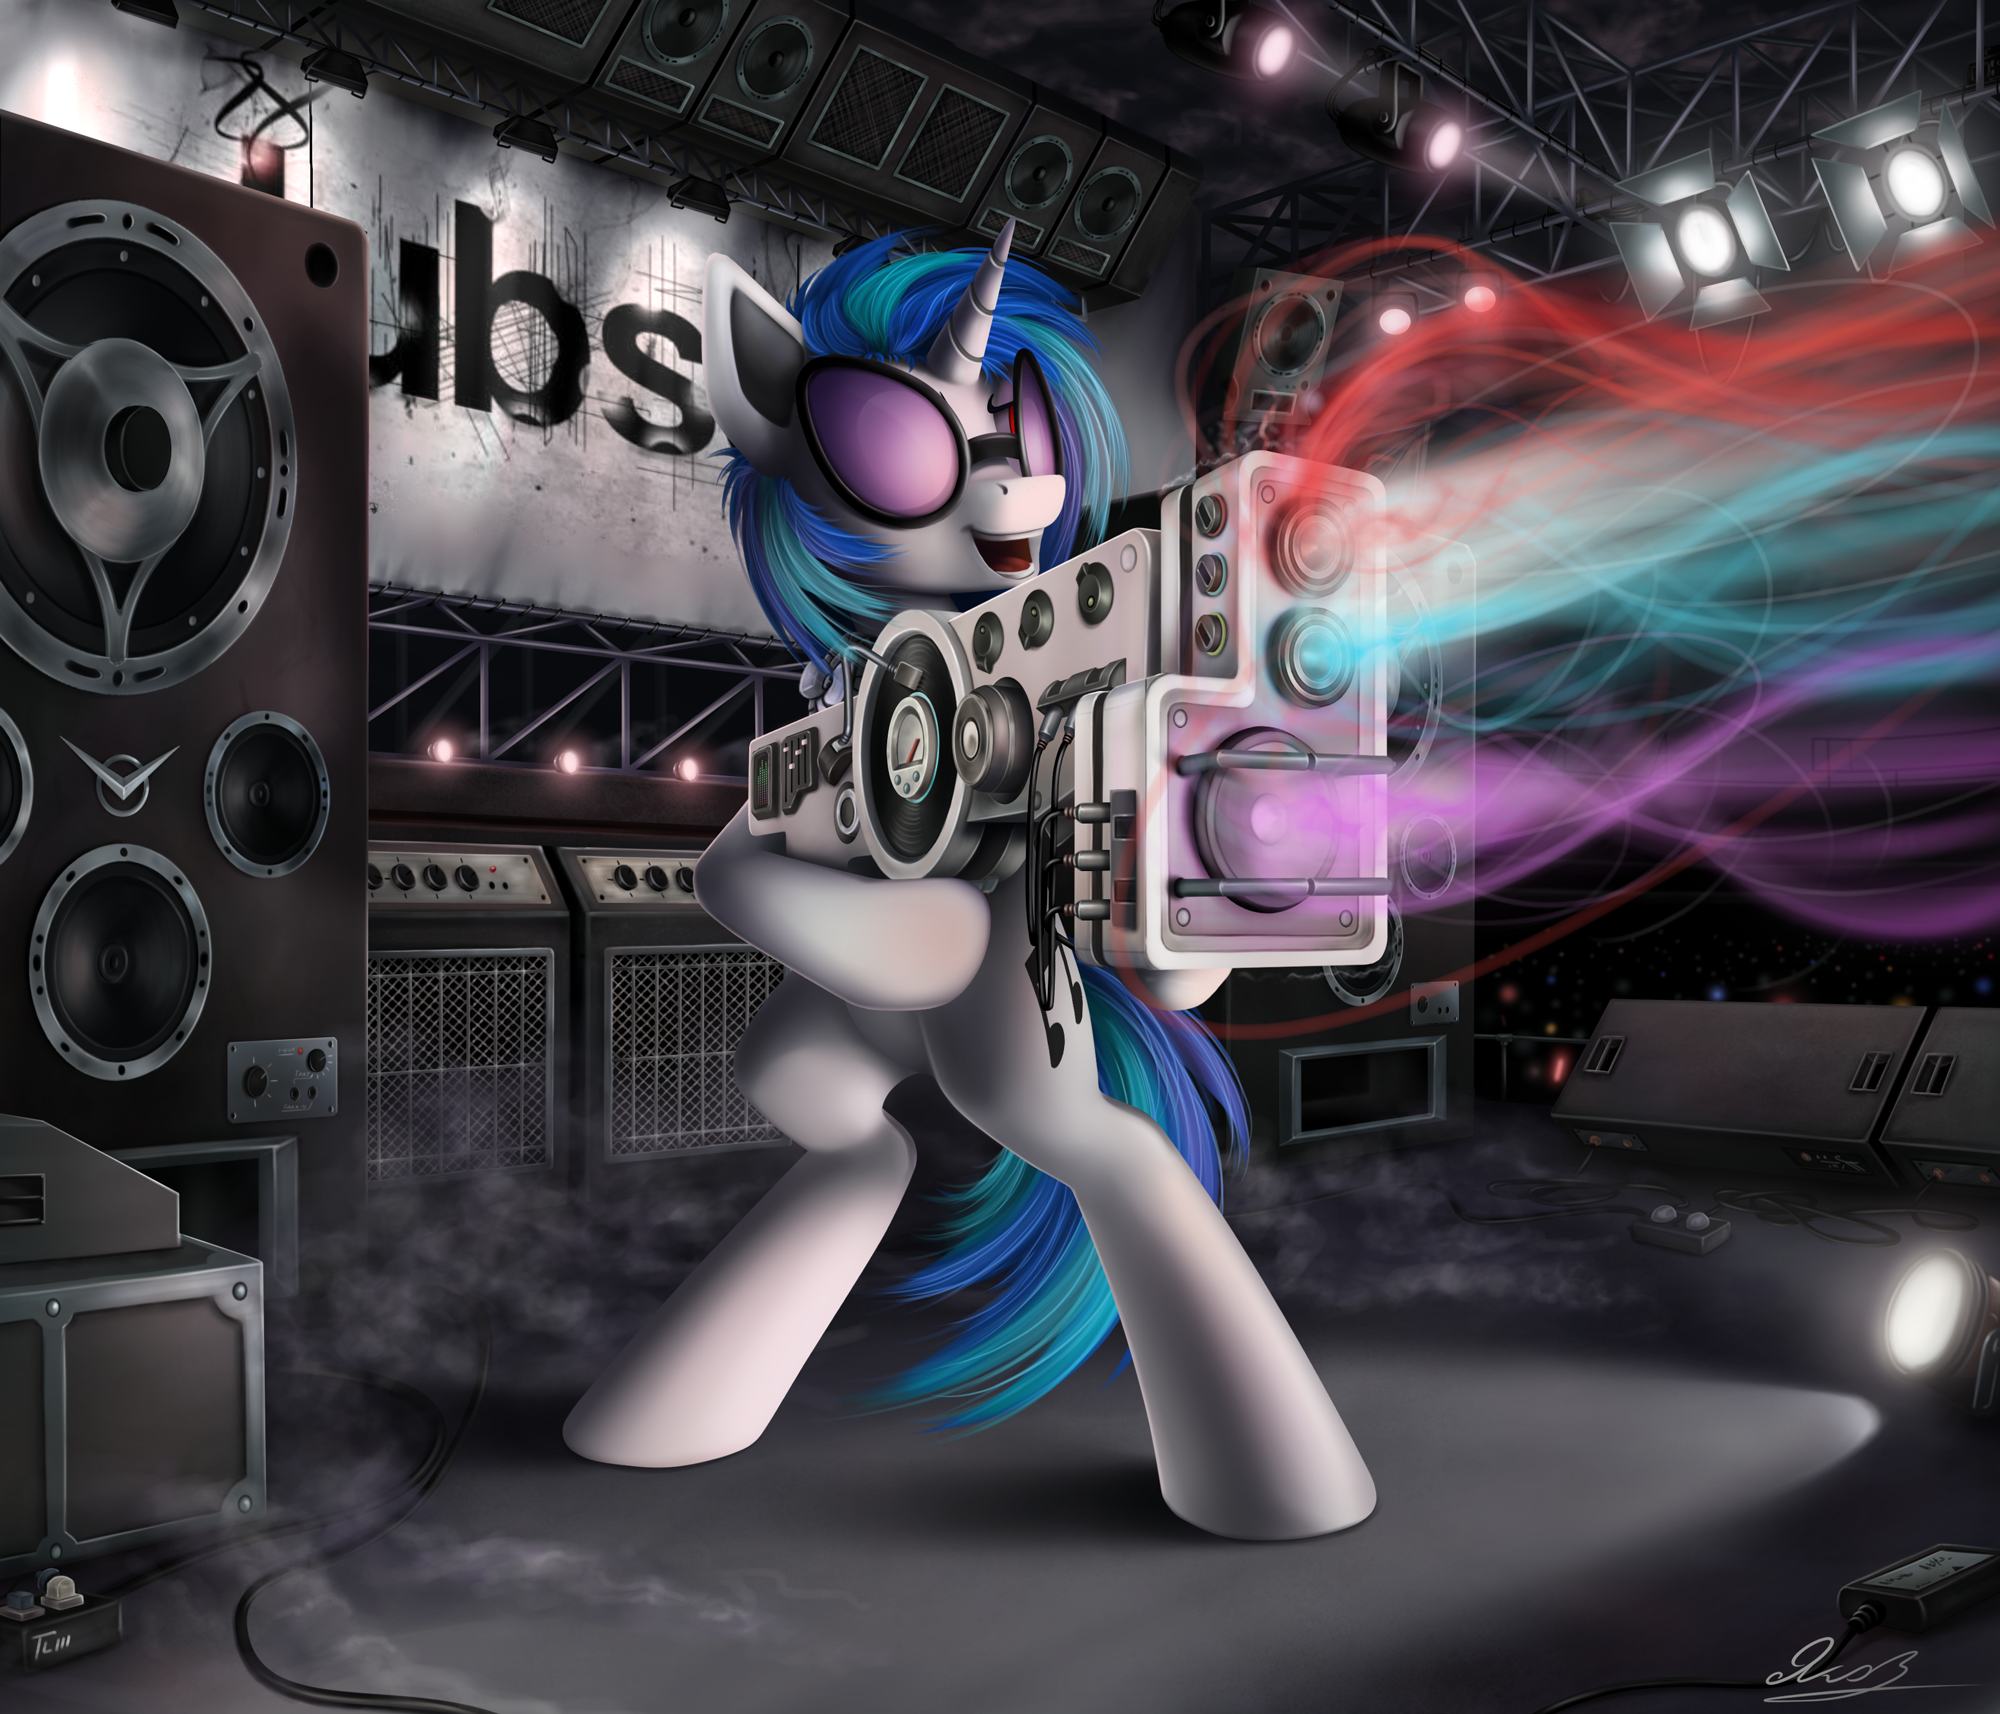 Bass Cannon by Yakovlev-vad